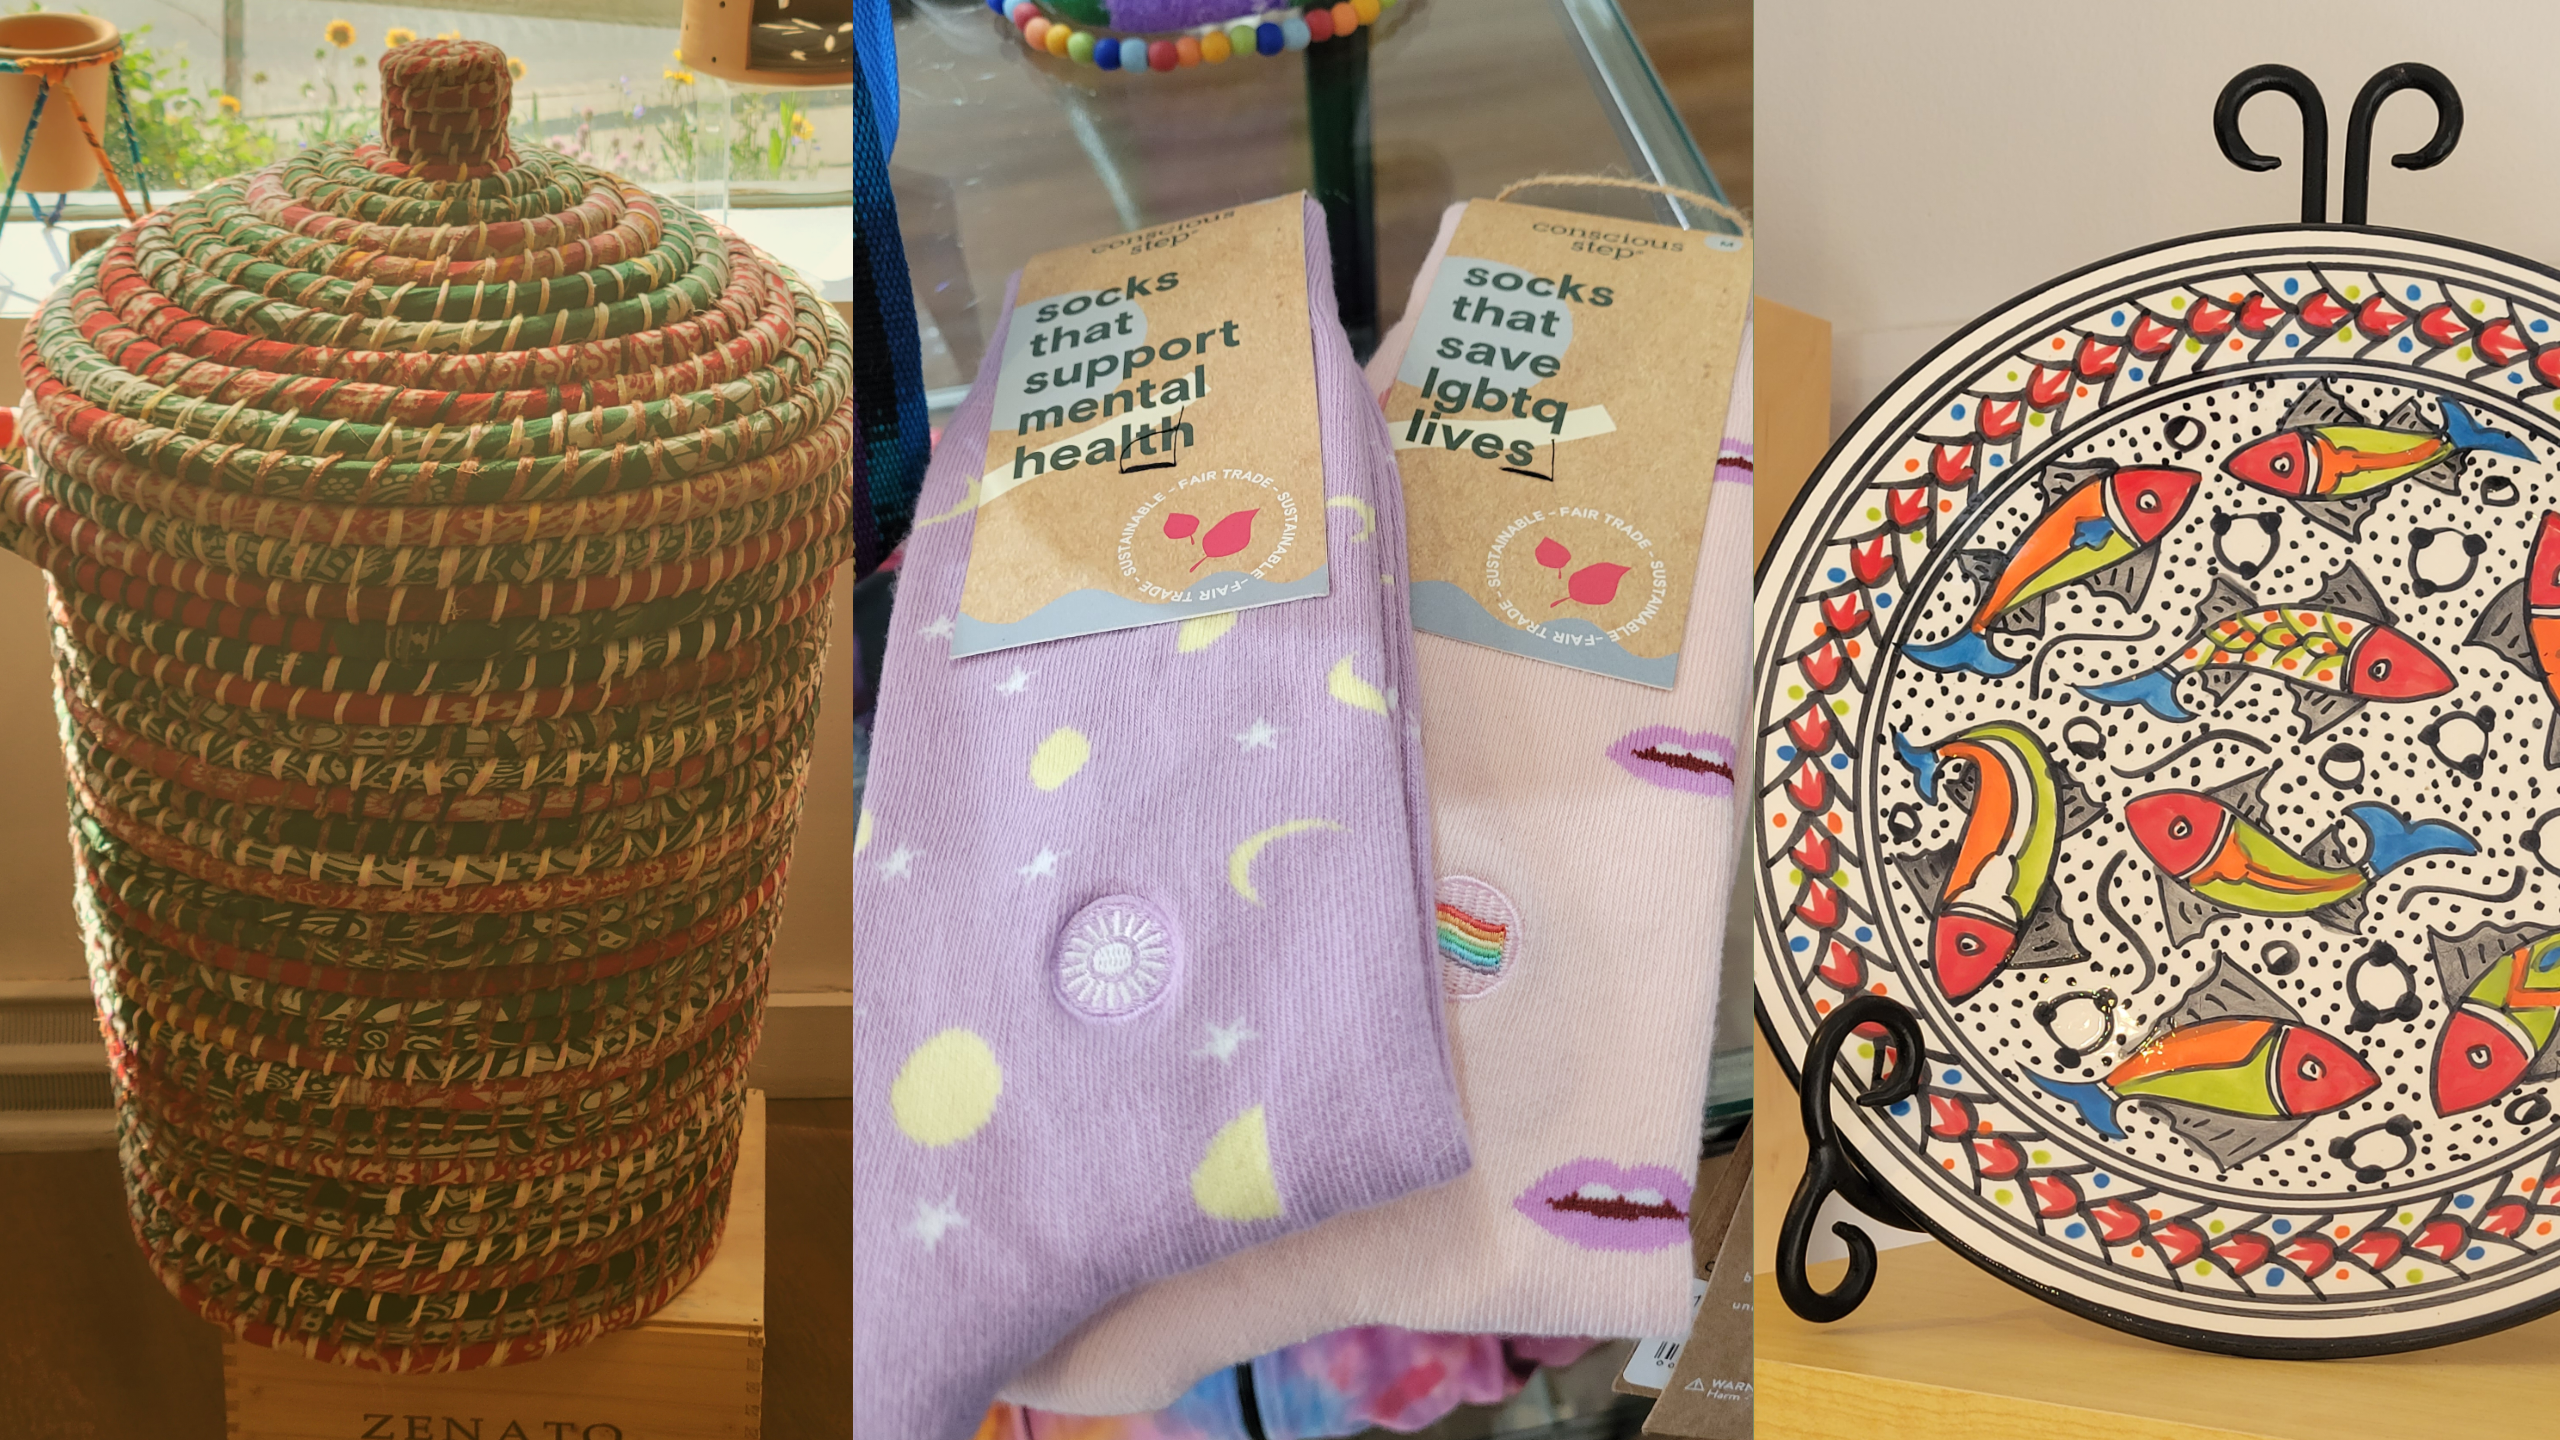 An assortment of hand crafted items and socks that support LGBTQ+ initiatives available at Villages Calgary